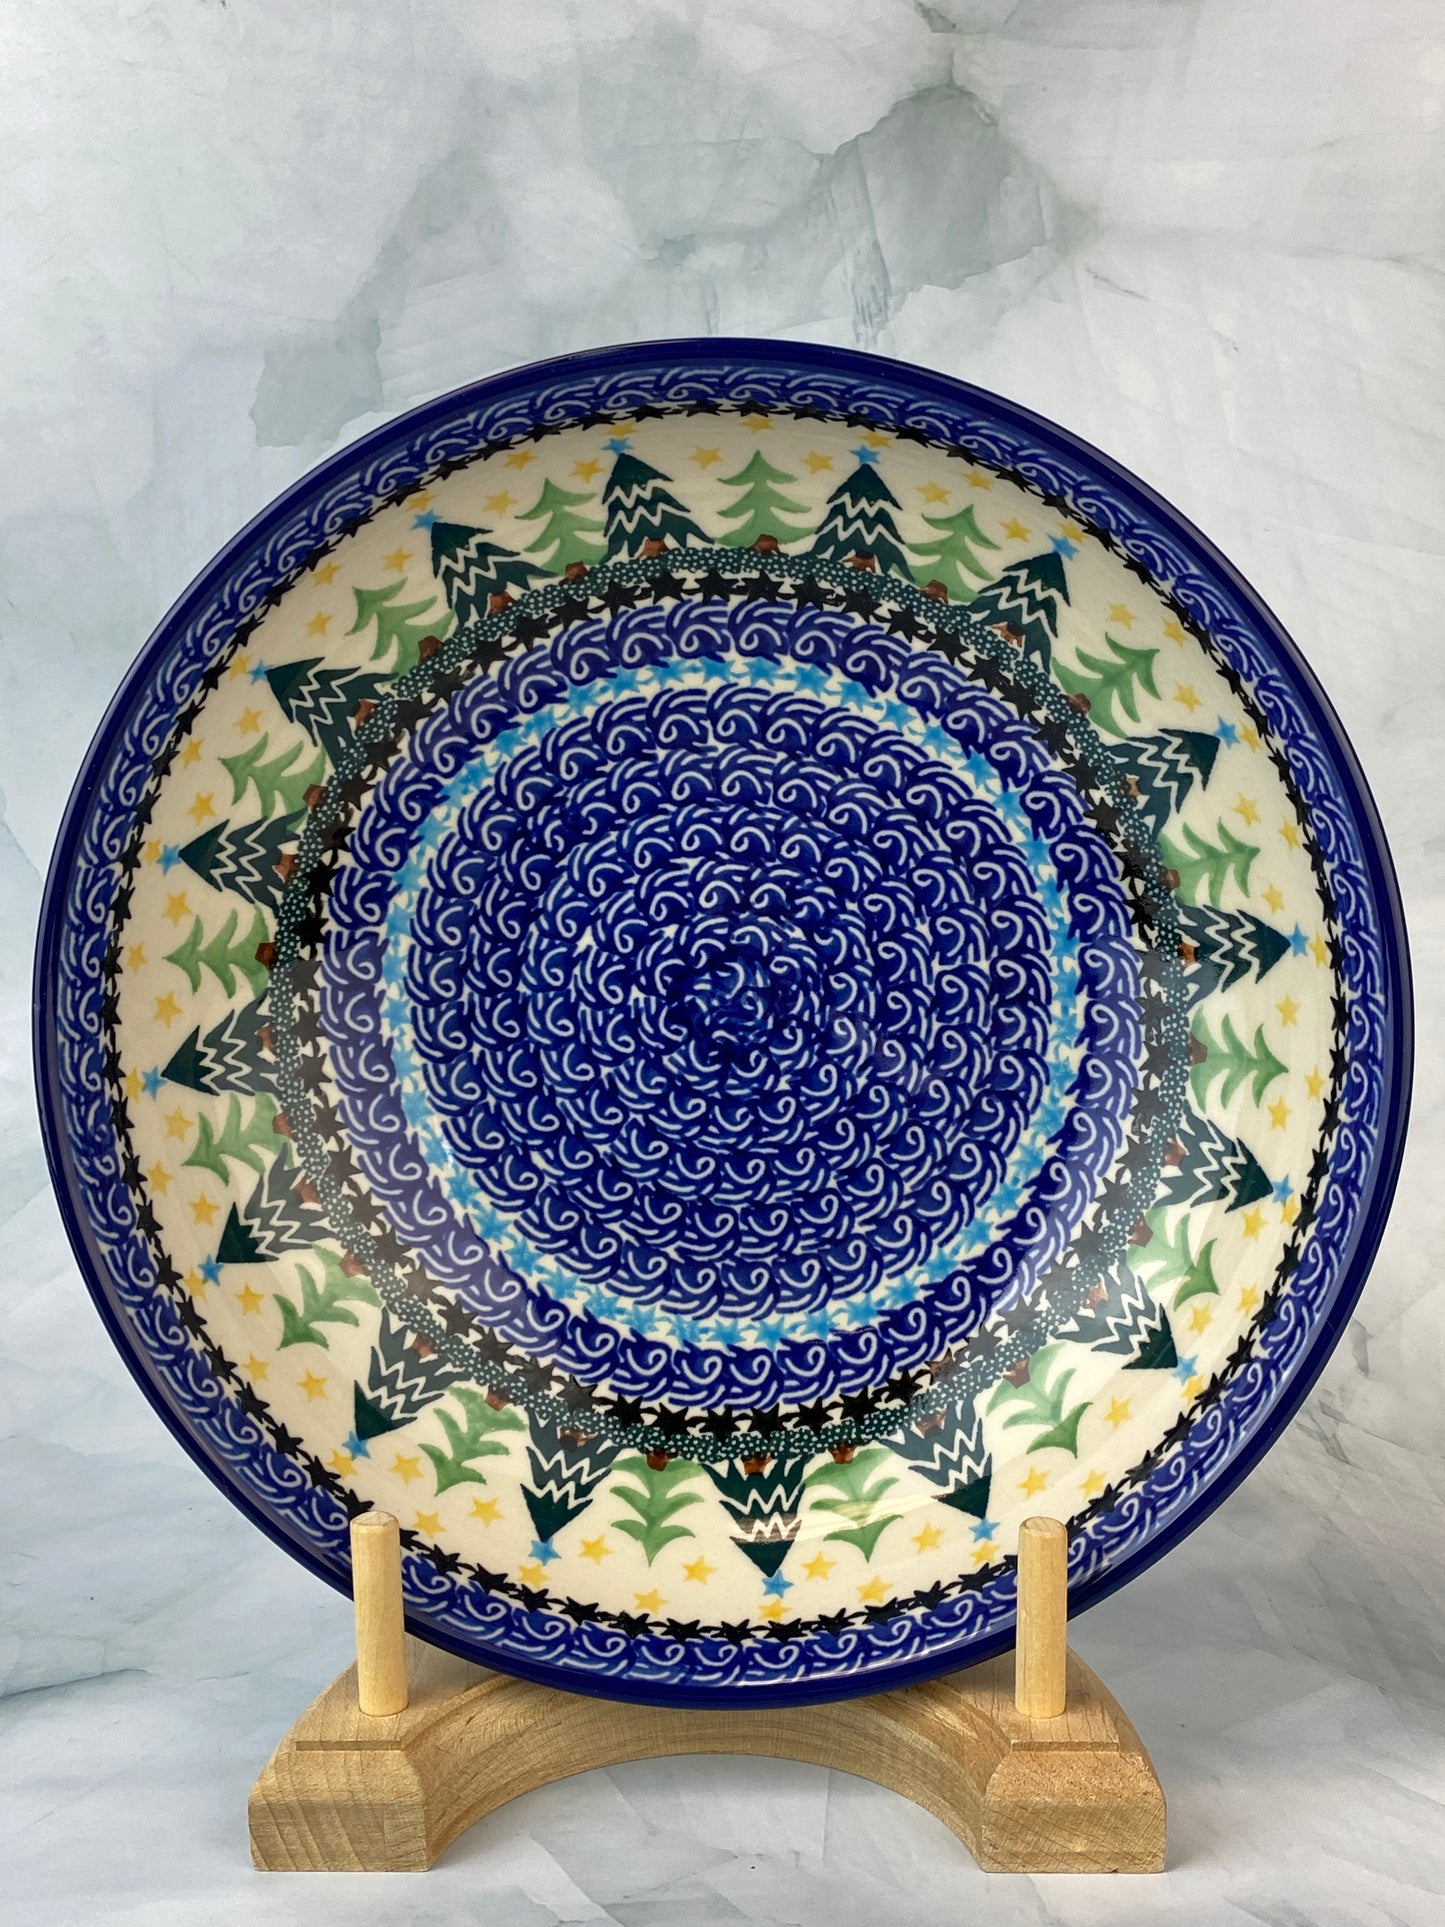 HOLIDAY SPECIAL 8.5" Serving Bowl - Shape B91 - Pattern 1284